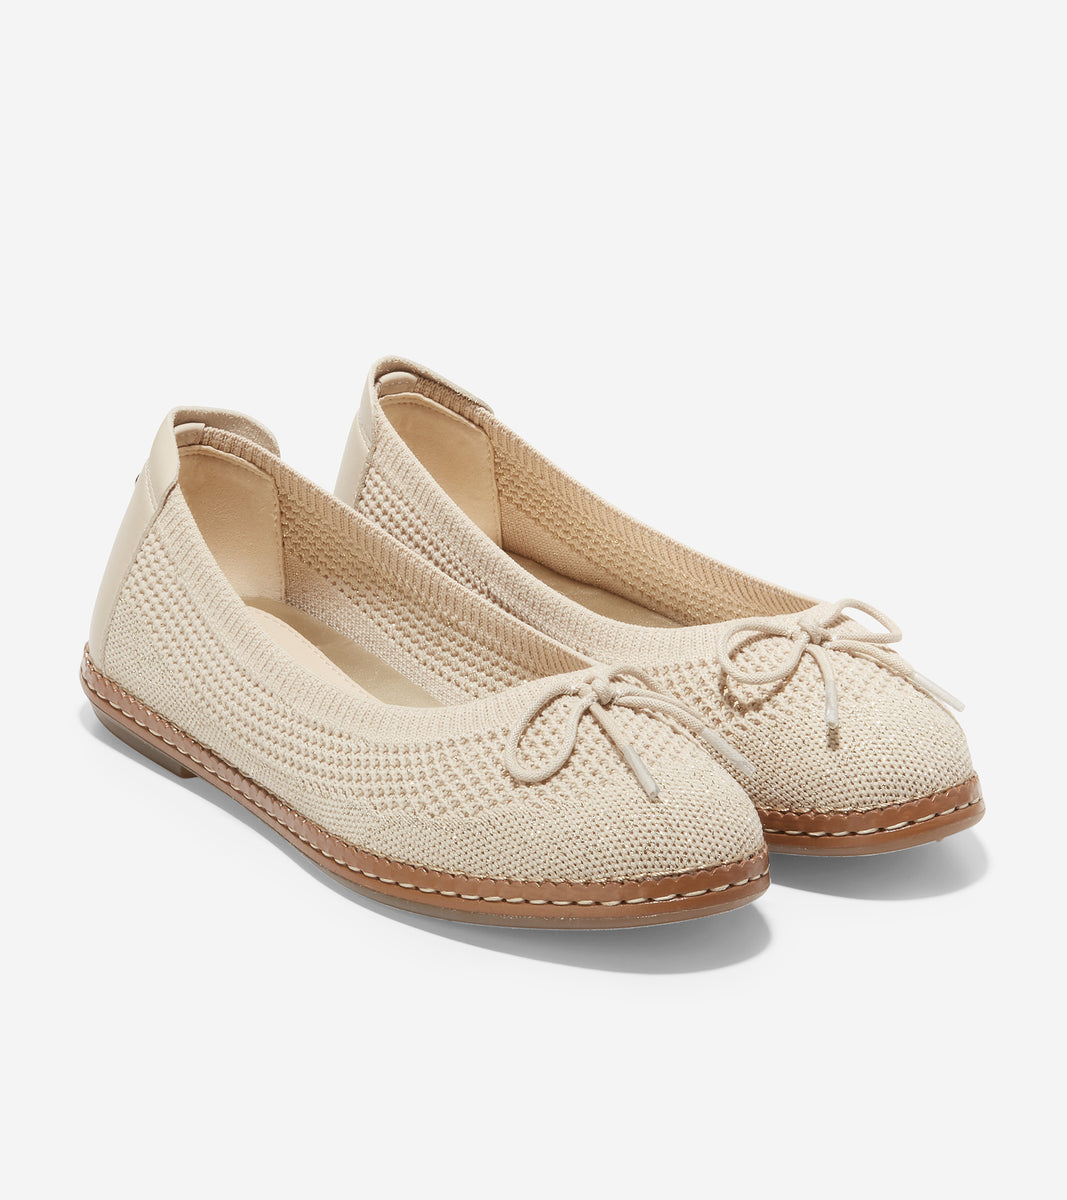 ColeHaan-Cloudfeel All-Day Ballet Flat-w21979-Cement Knit-Gold